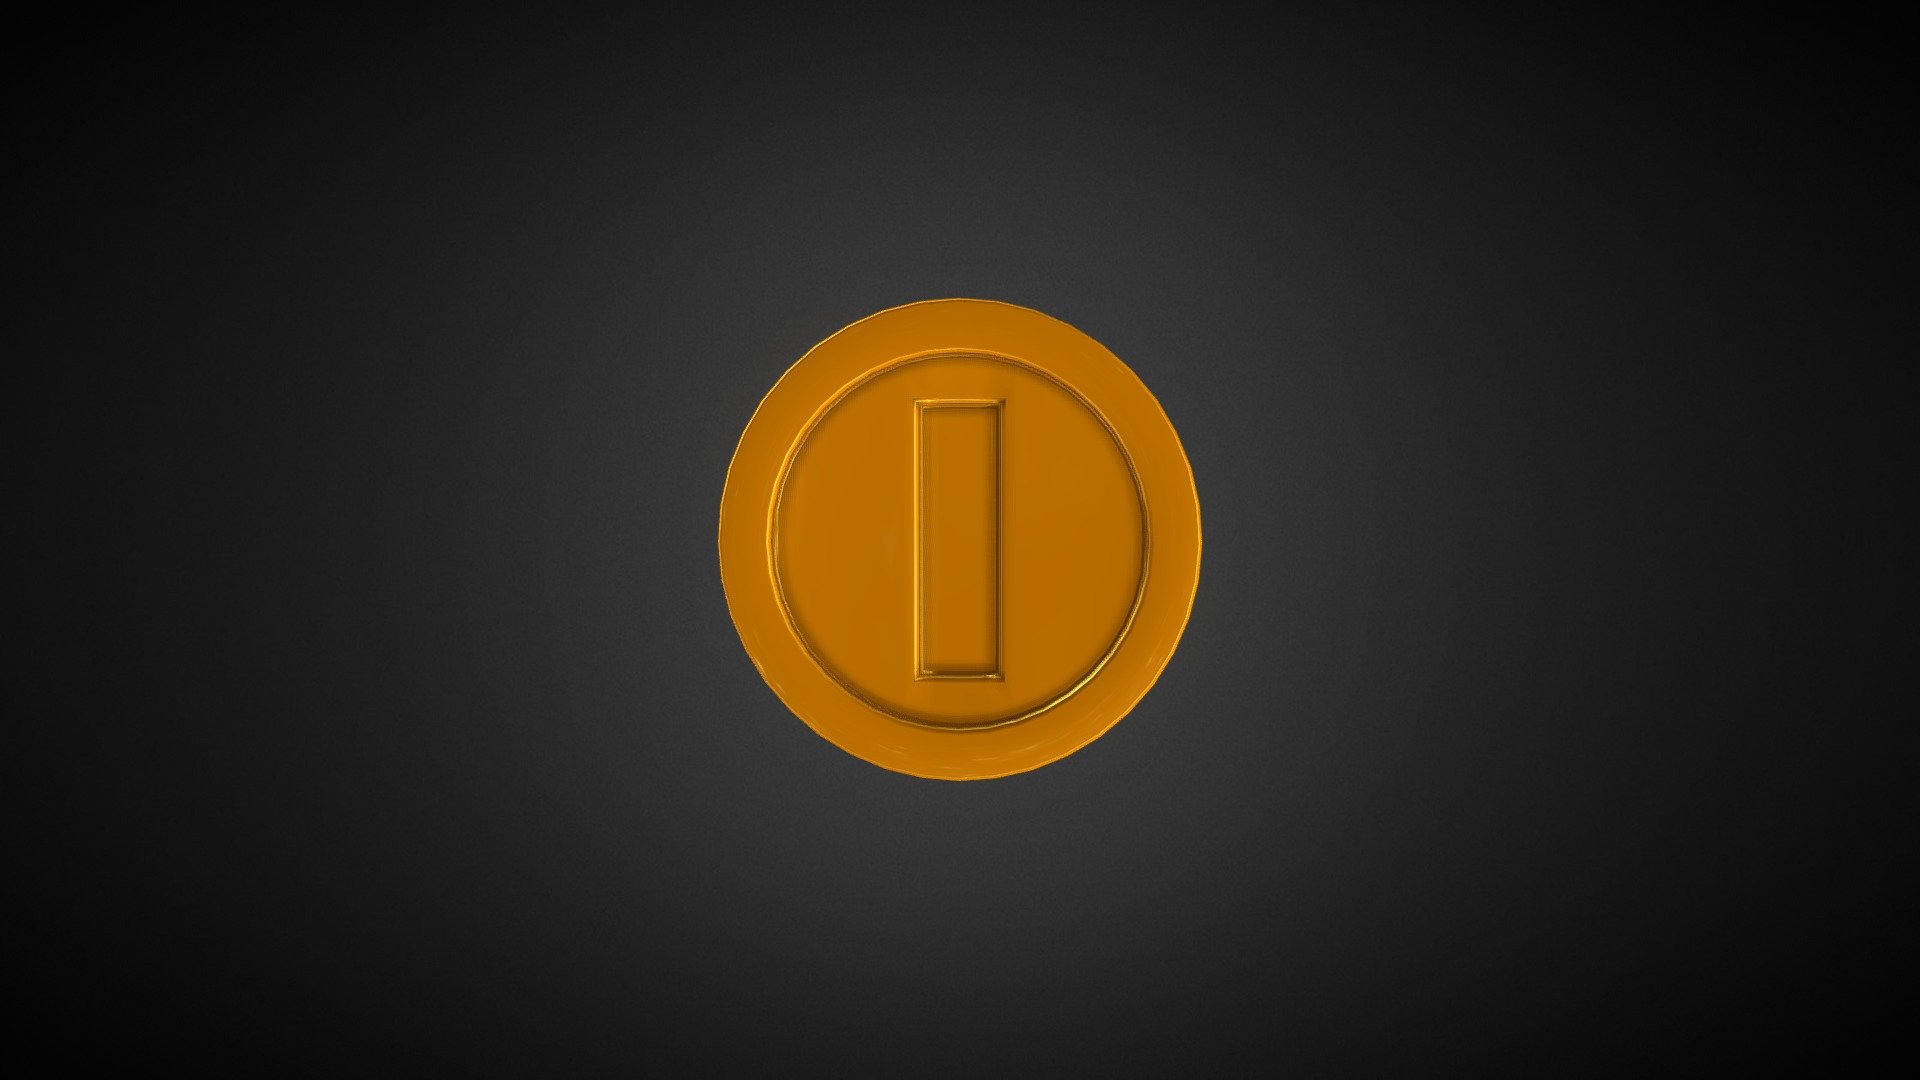 A coin from Super Mario Bros I created a few months back for a class project on simple animations 3d model